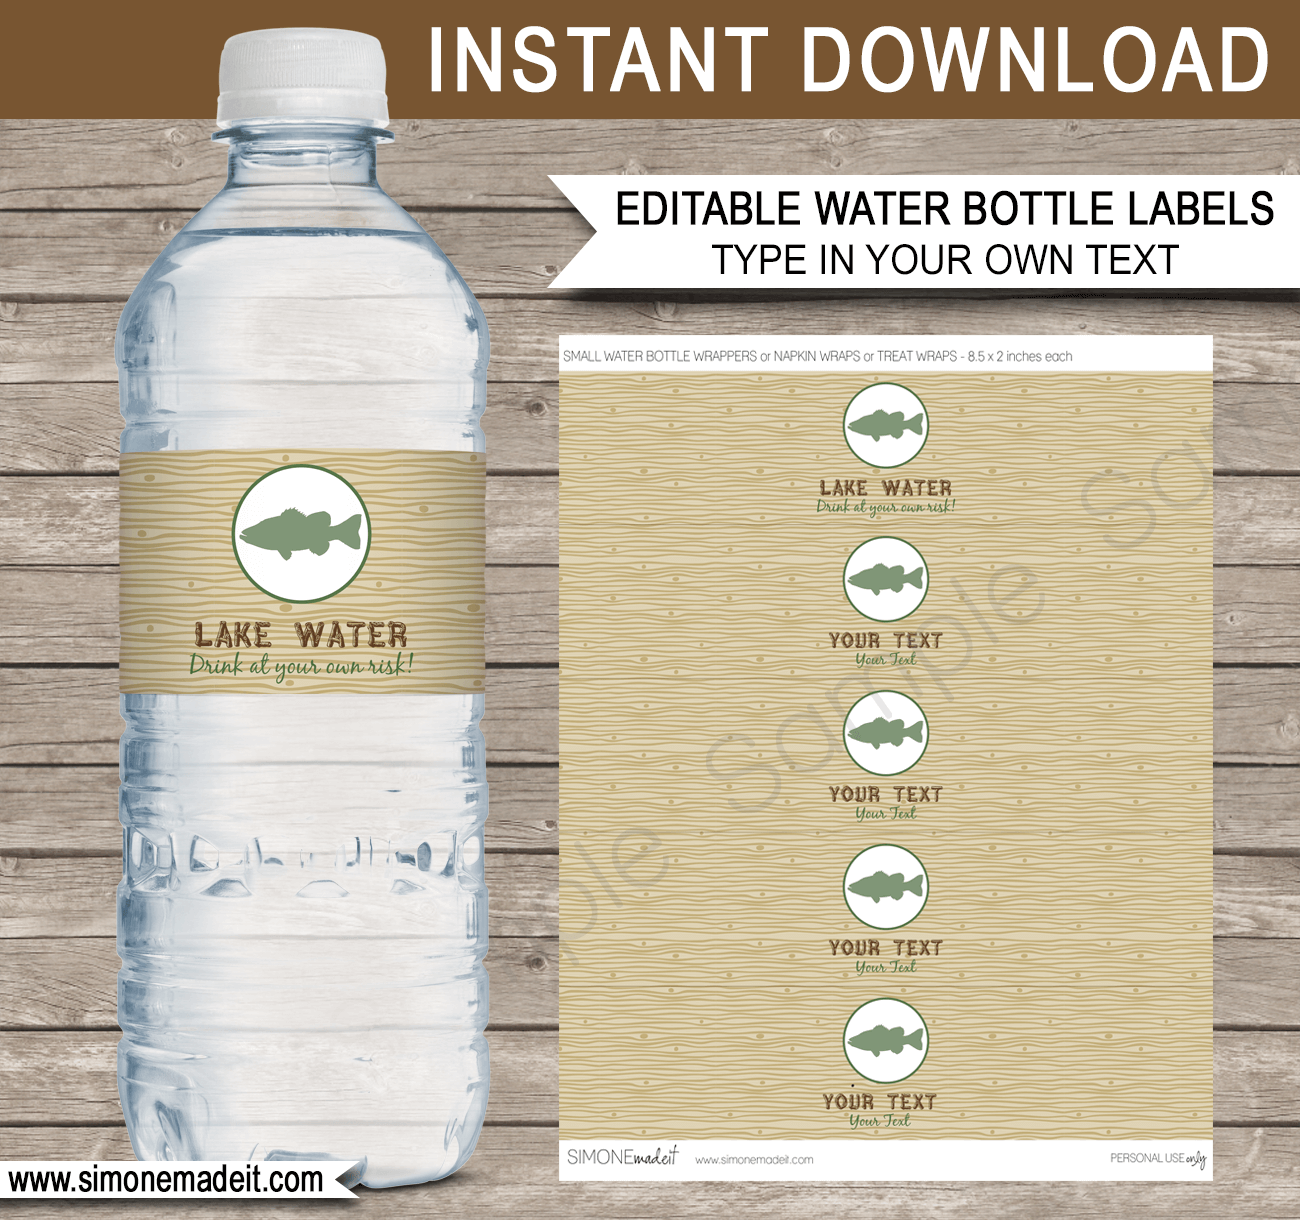 https://www.simonemadeit.com/wp-content/uploads/edd/2020/05/Fishing-Birthday-Party-Water-Bottle-Labels.png